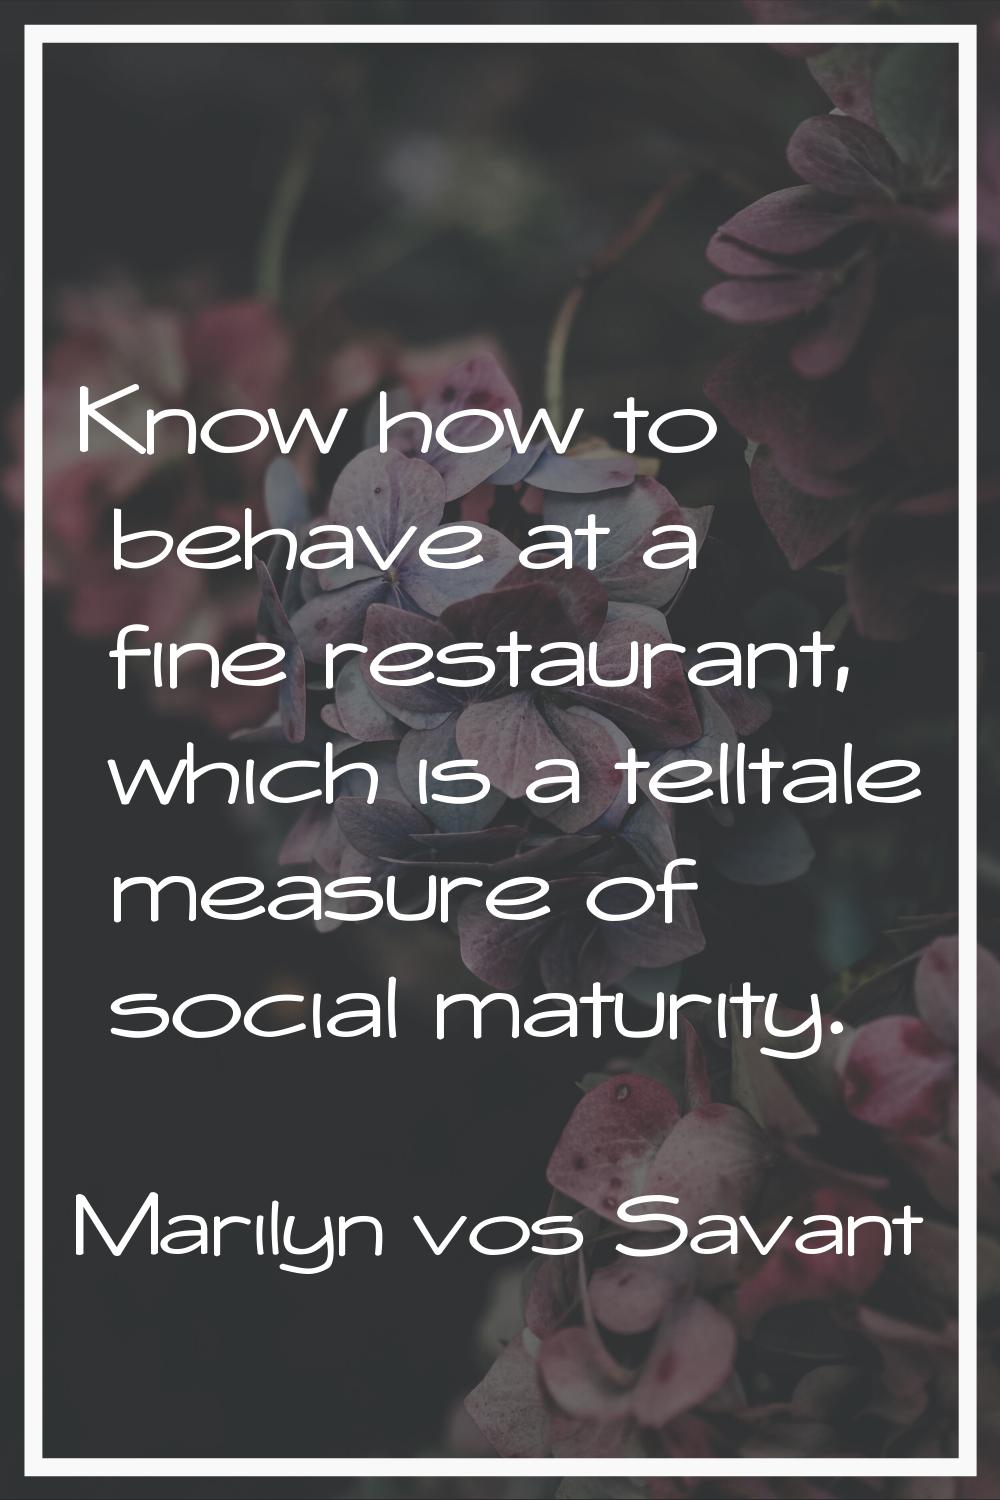 Know how to behave at a fine restaurant, which is a telltale measure of social maturity.